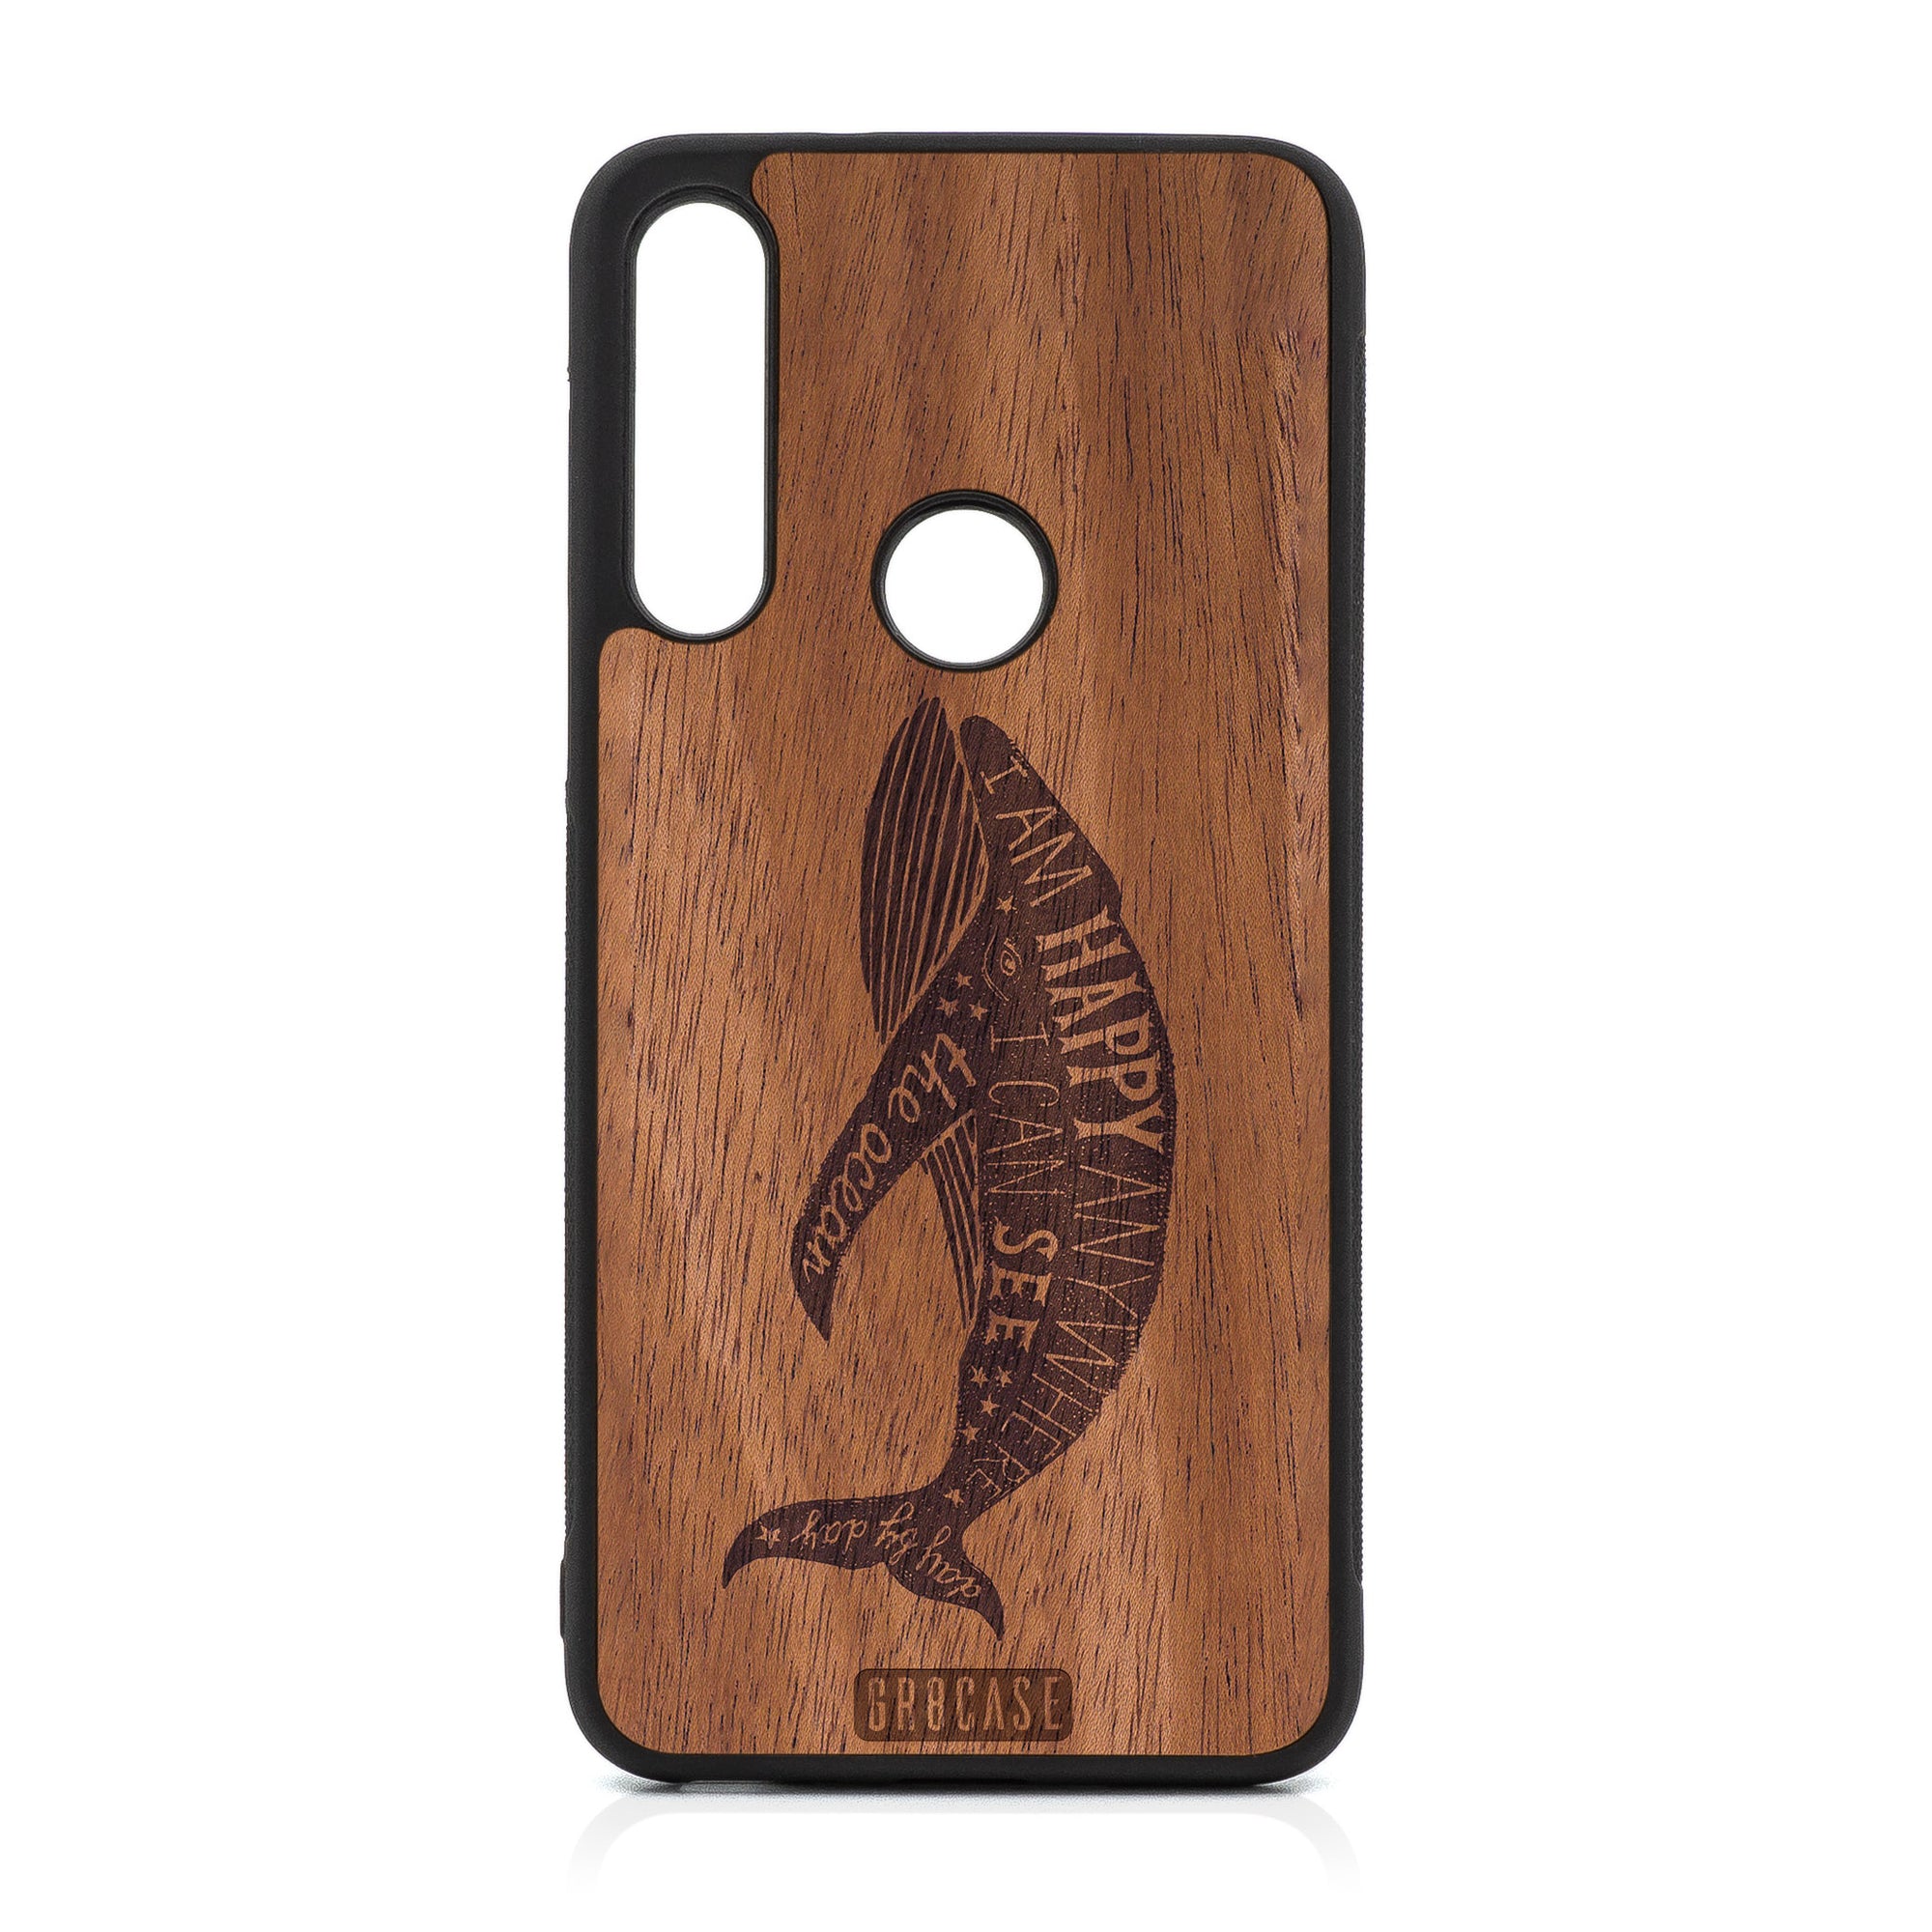 I'm Happy Anywhere I Can See The Ocean (Whale) Design Wood Case For Moto G Fast